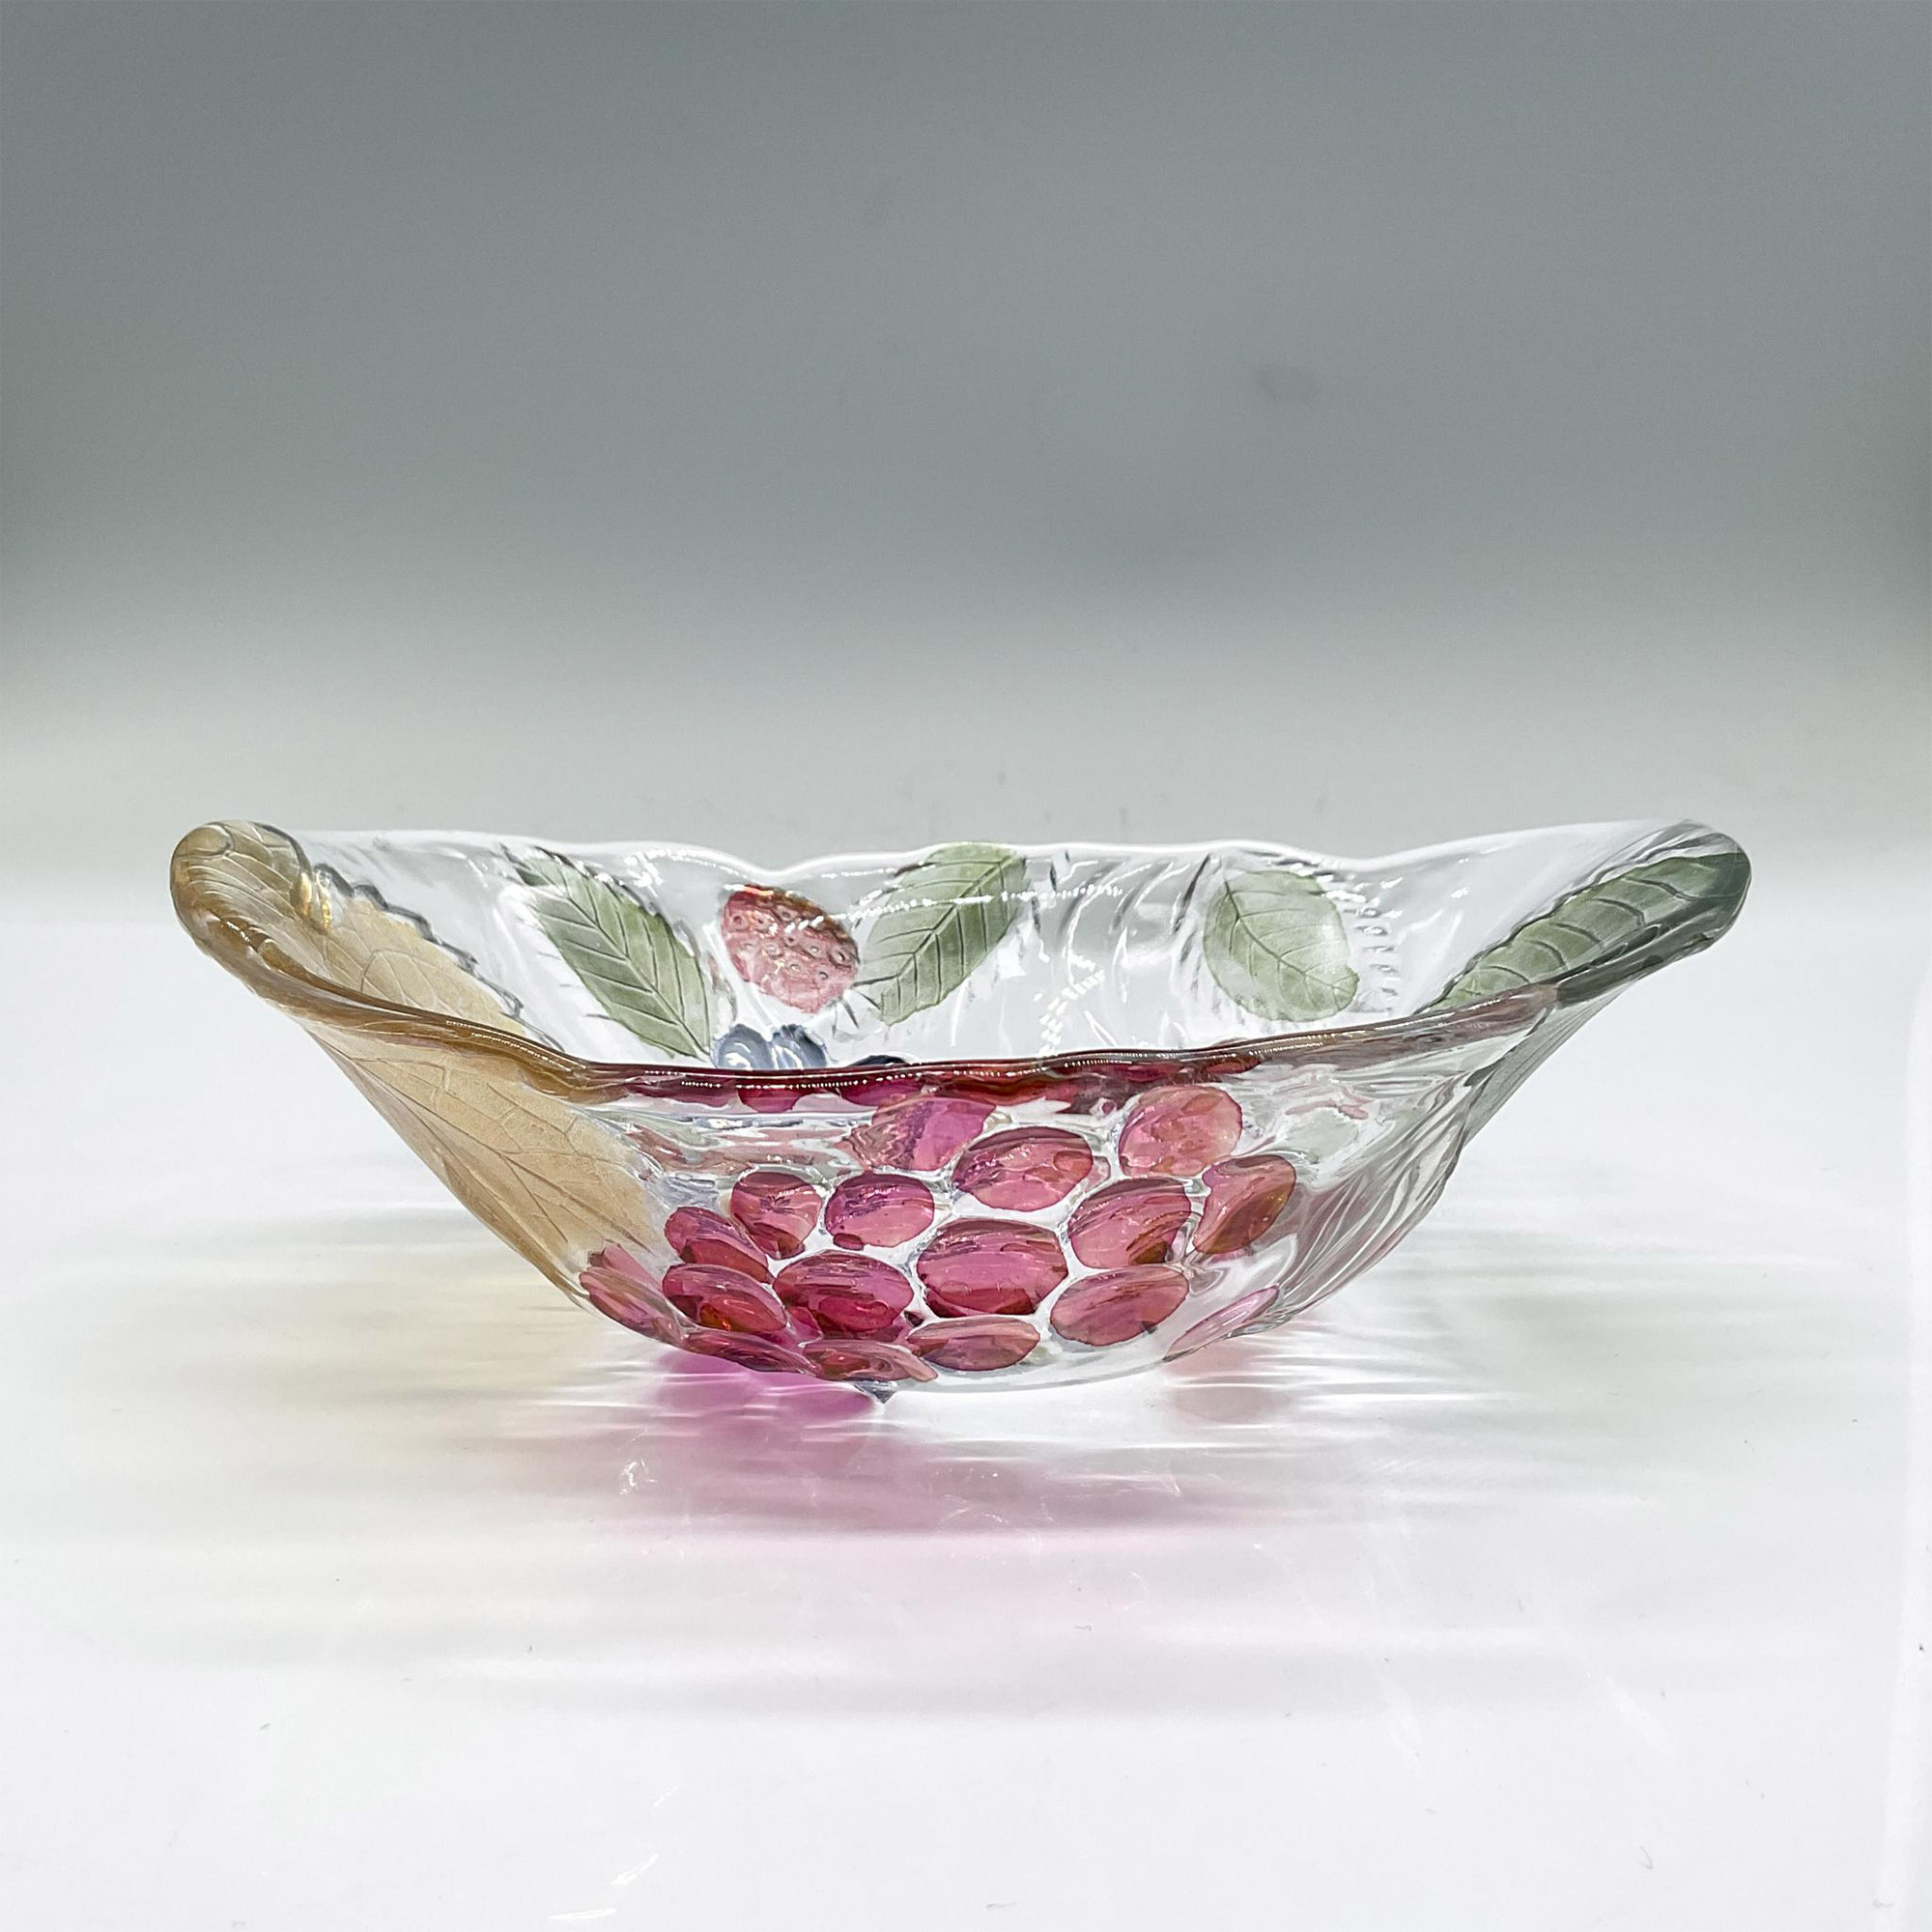 2pc Glass Serving Platter + Bowl - Fruits, Flowers + Leaves - Image 4 of 7